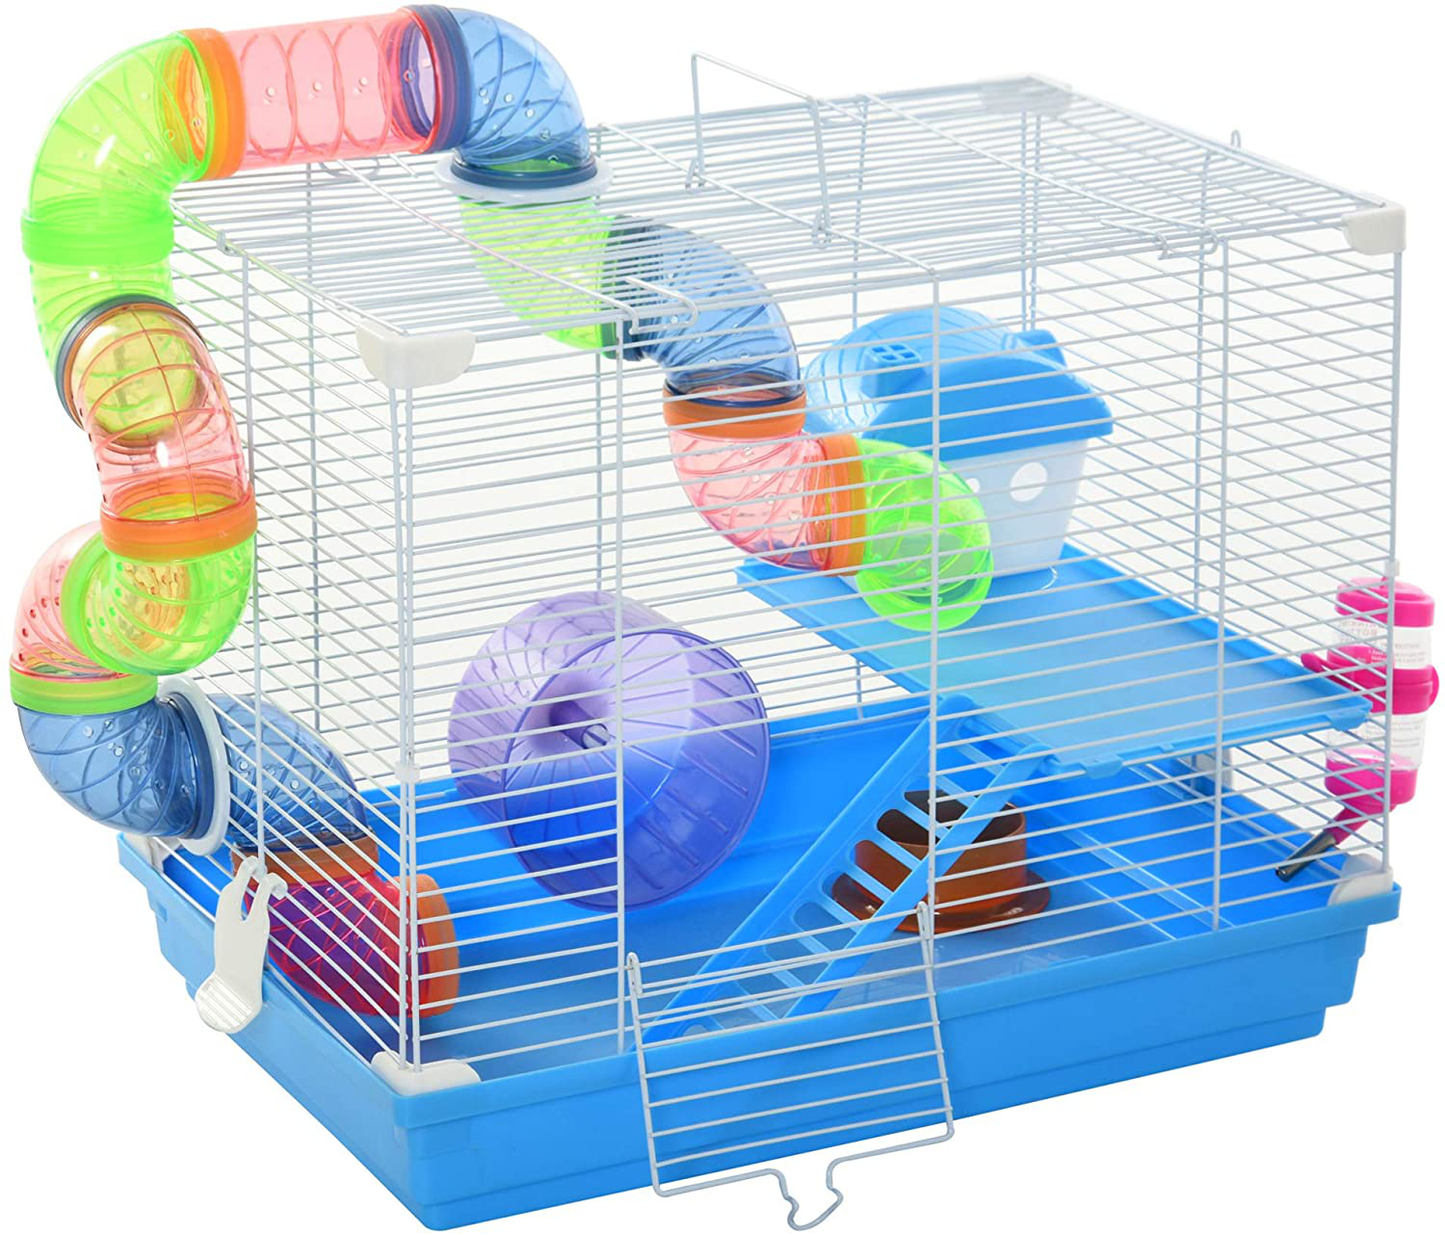 Pawhut 2-Level Hamster Cage Gerbil House Habitat Kit Small Animal Travel Carrier with Exercise Wheel, Play Tubes, Water Bottle, Food Dishes, & Interior Ladder